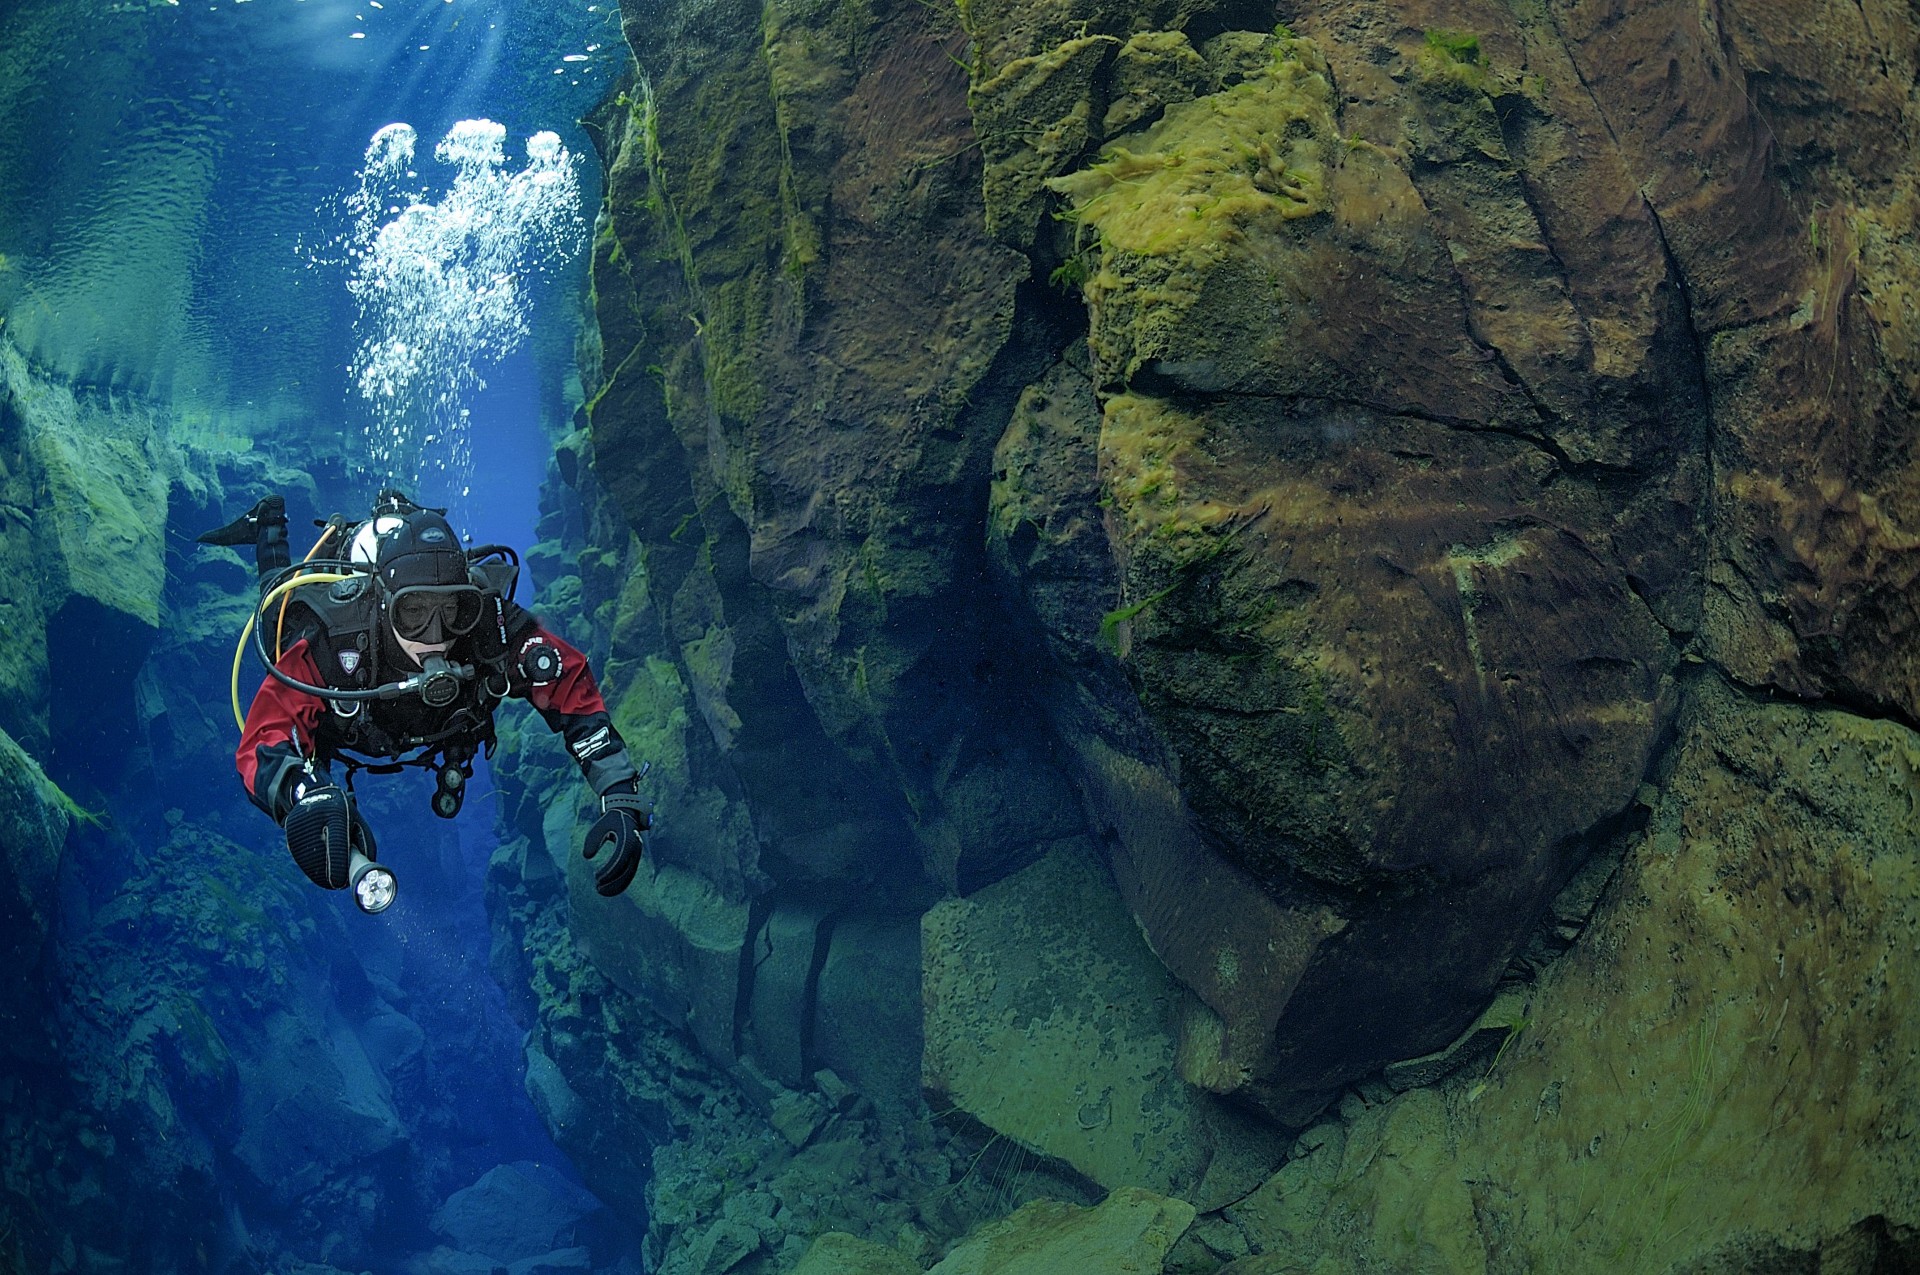 Silfra and Davidsgja diving combo in Iceland with DIVE.IS